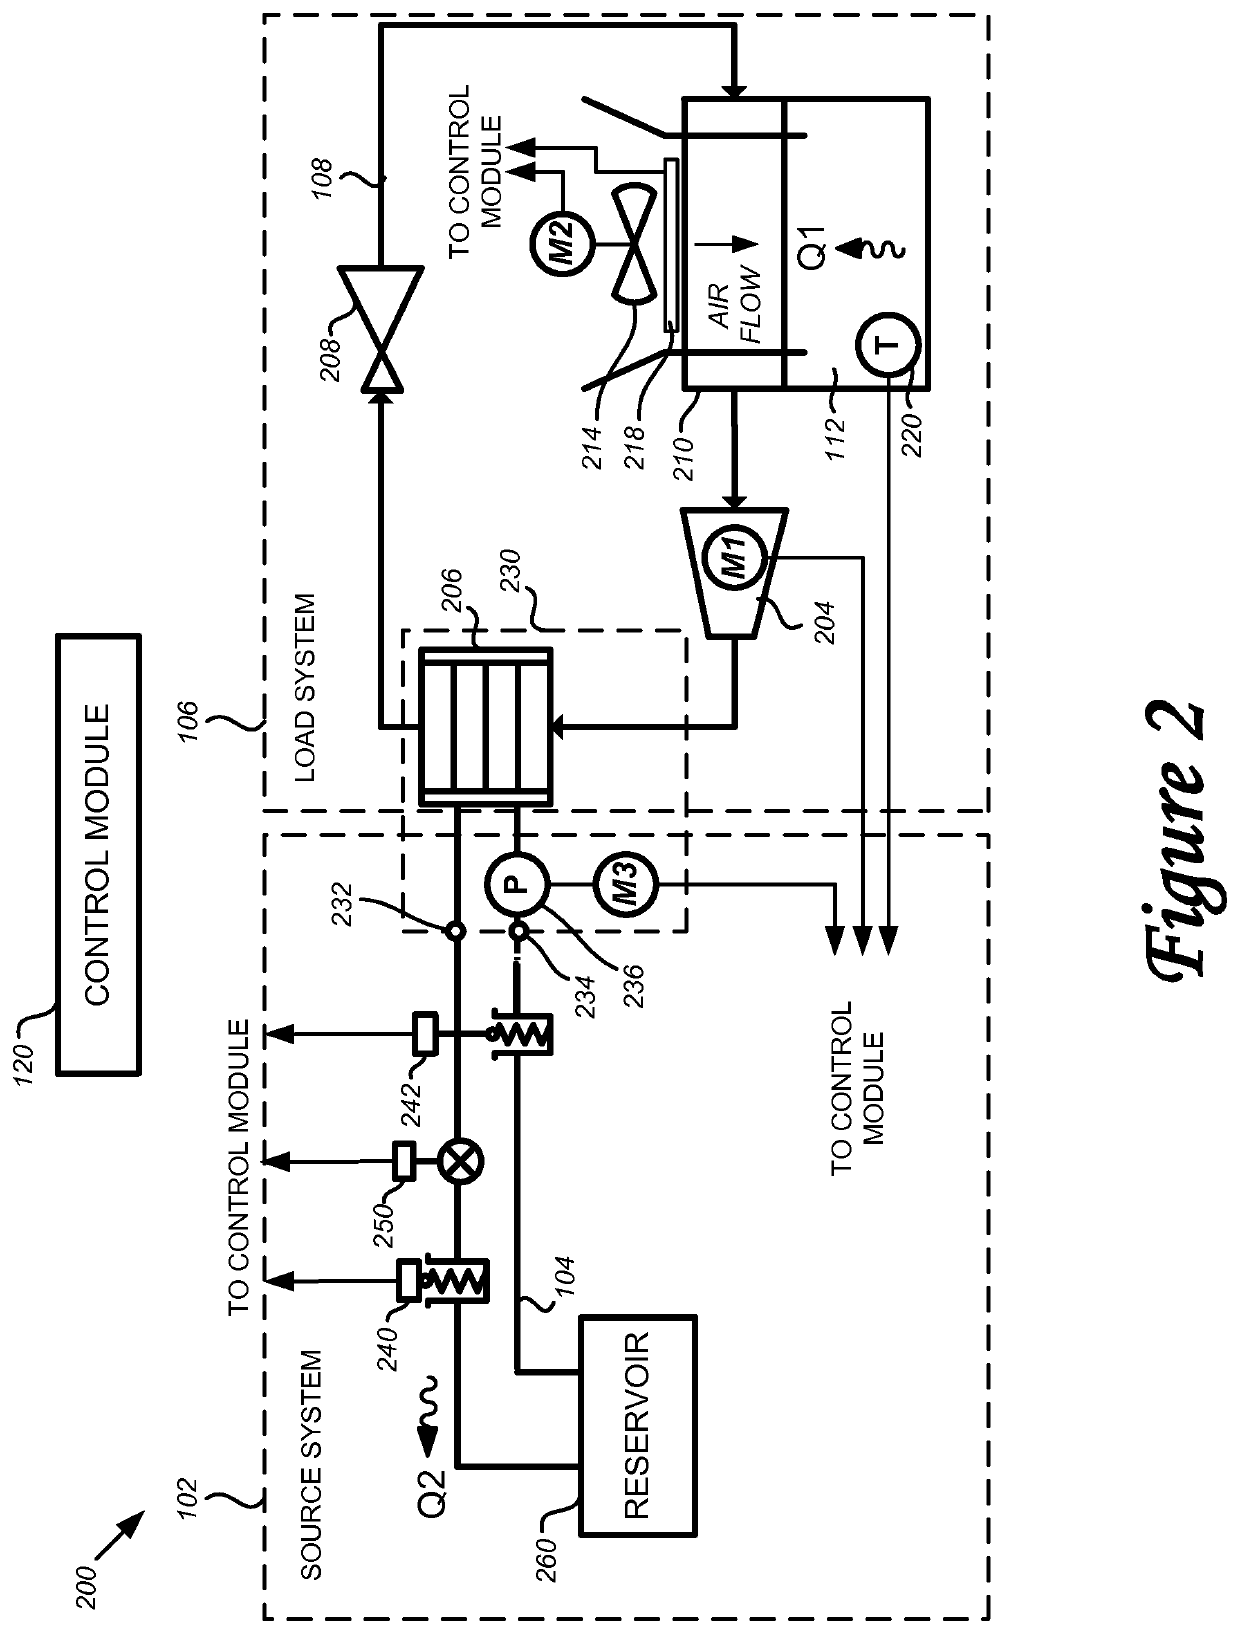 Space conditioning control and monitoring method and system